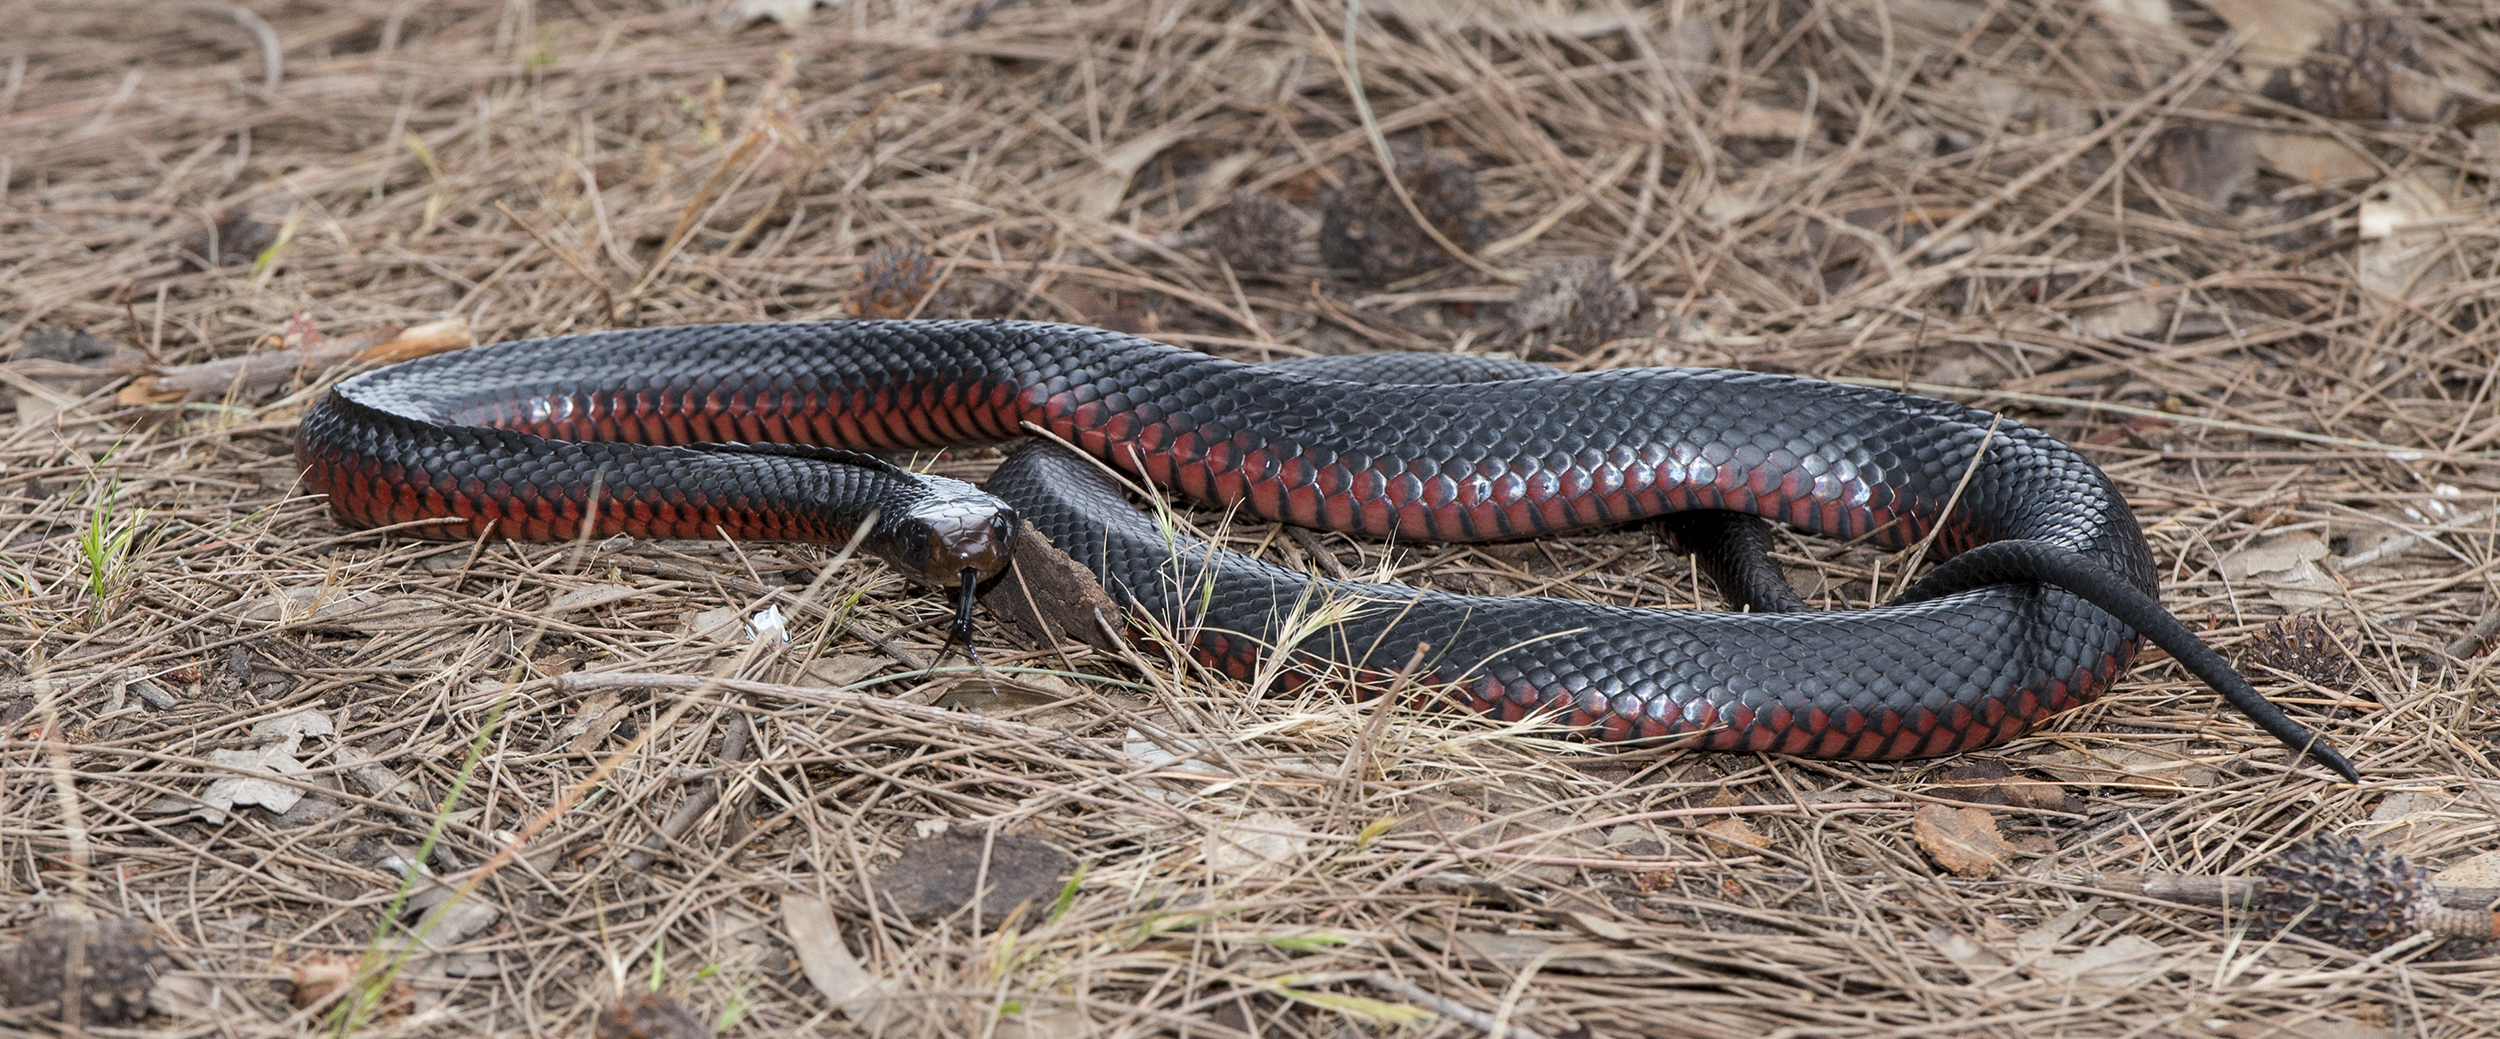 8 myths about snakes - Museums Victoria